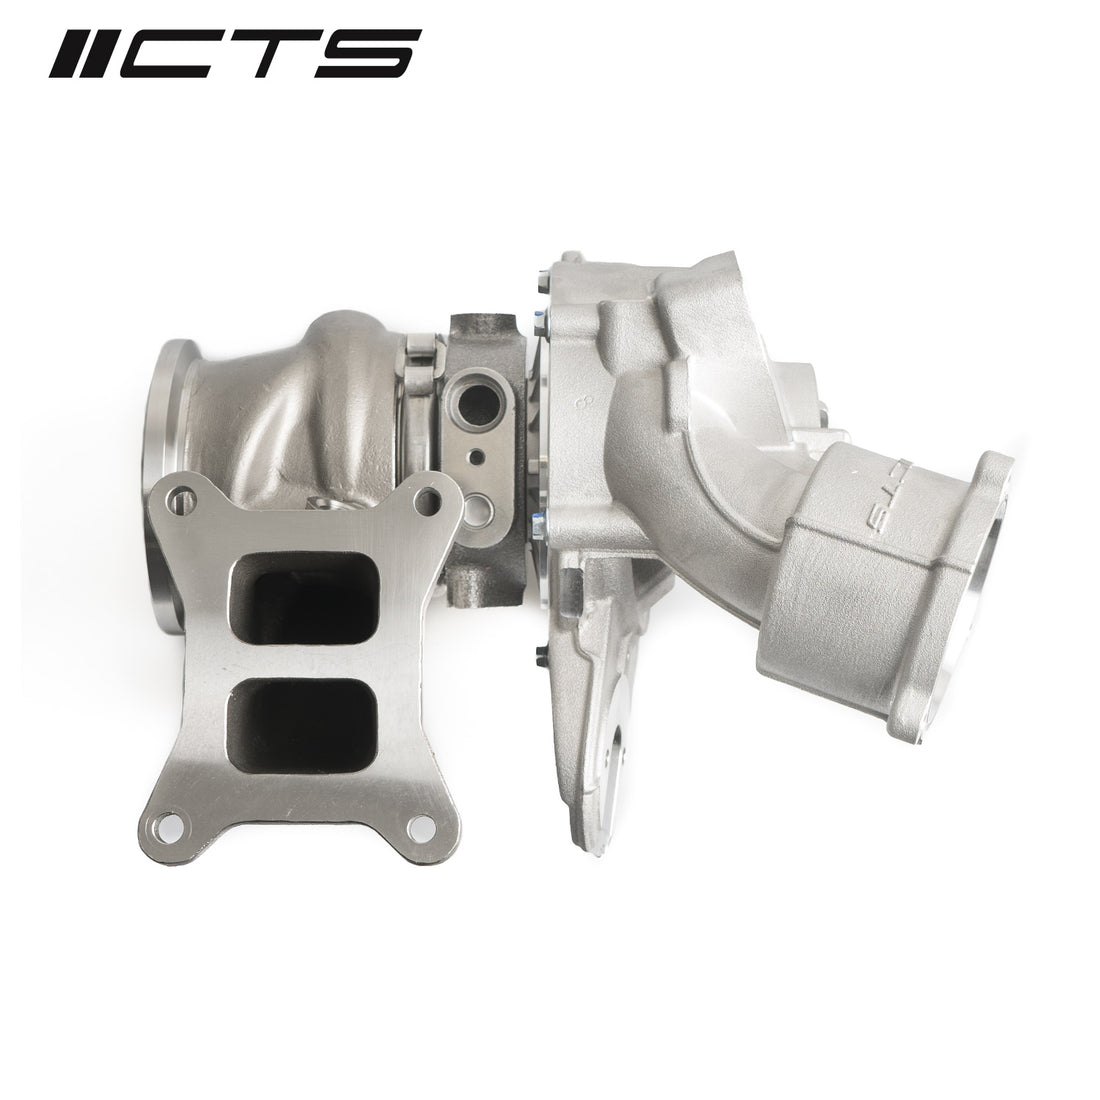 CTS Turbo IS38 Replacement Turbocharger for MQB Golf/GTI/Golf R; Audi A3/S3 (2015+) CTS Turbo TR-1000